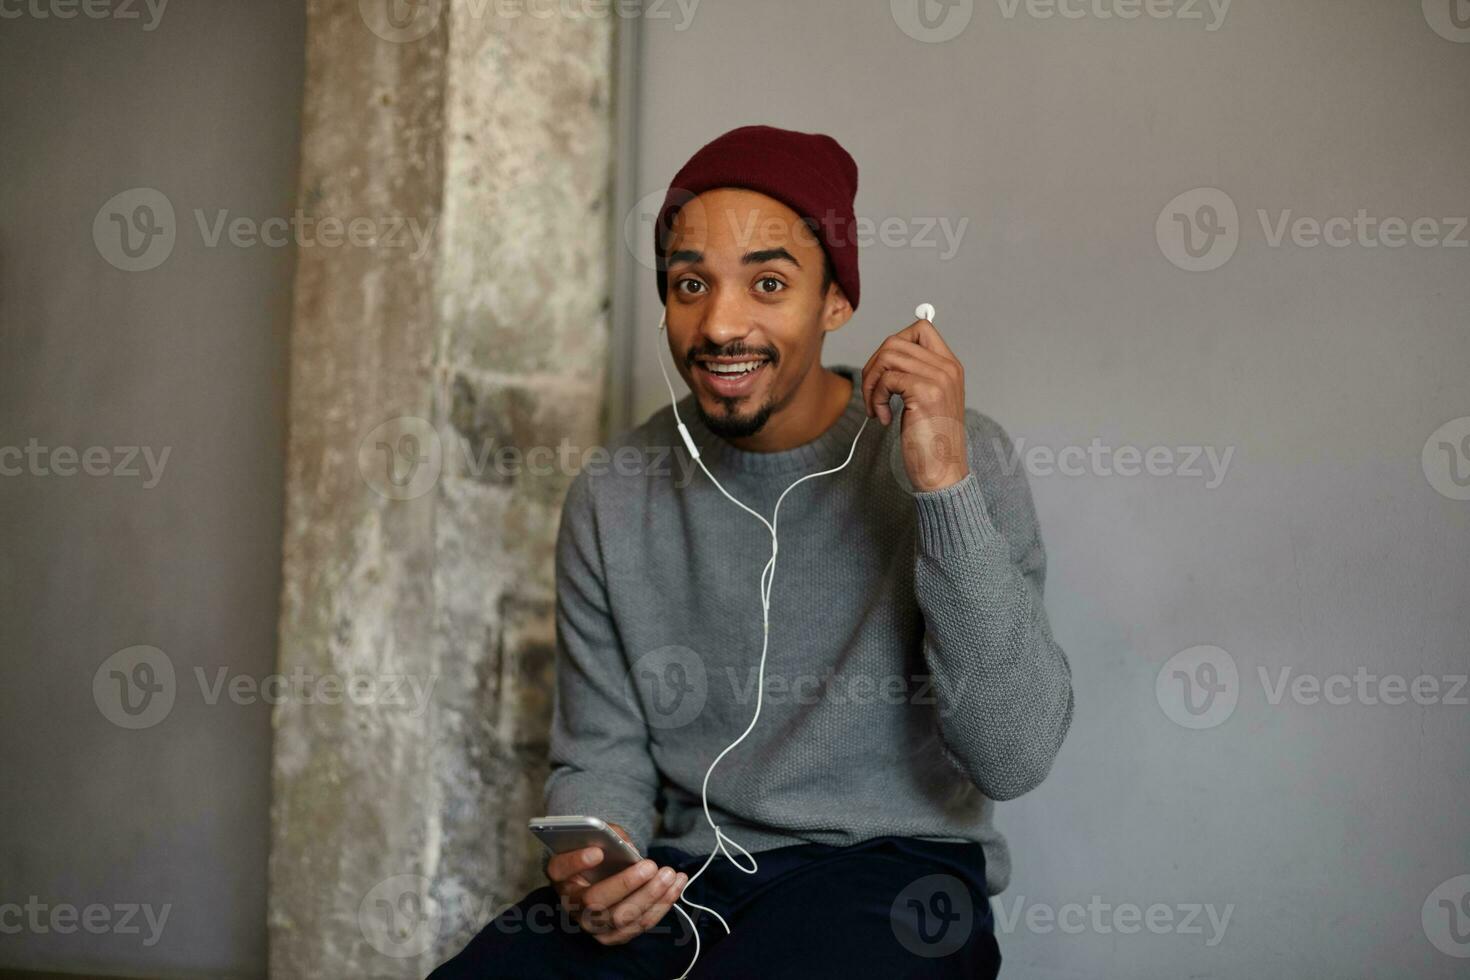 Beautiful cheerful young brown eyed bearded male with dark skin taking out earpiece while sitting over white wall, smiling widely with round eyes, wearing grey sweater and burgundy cap photo